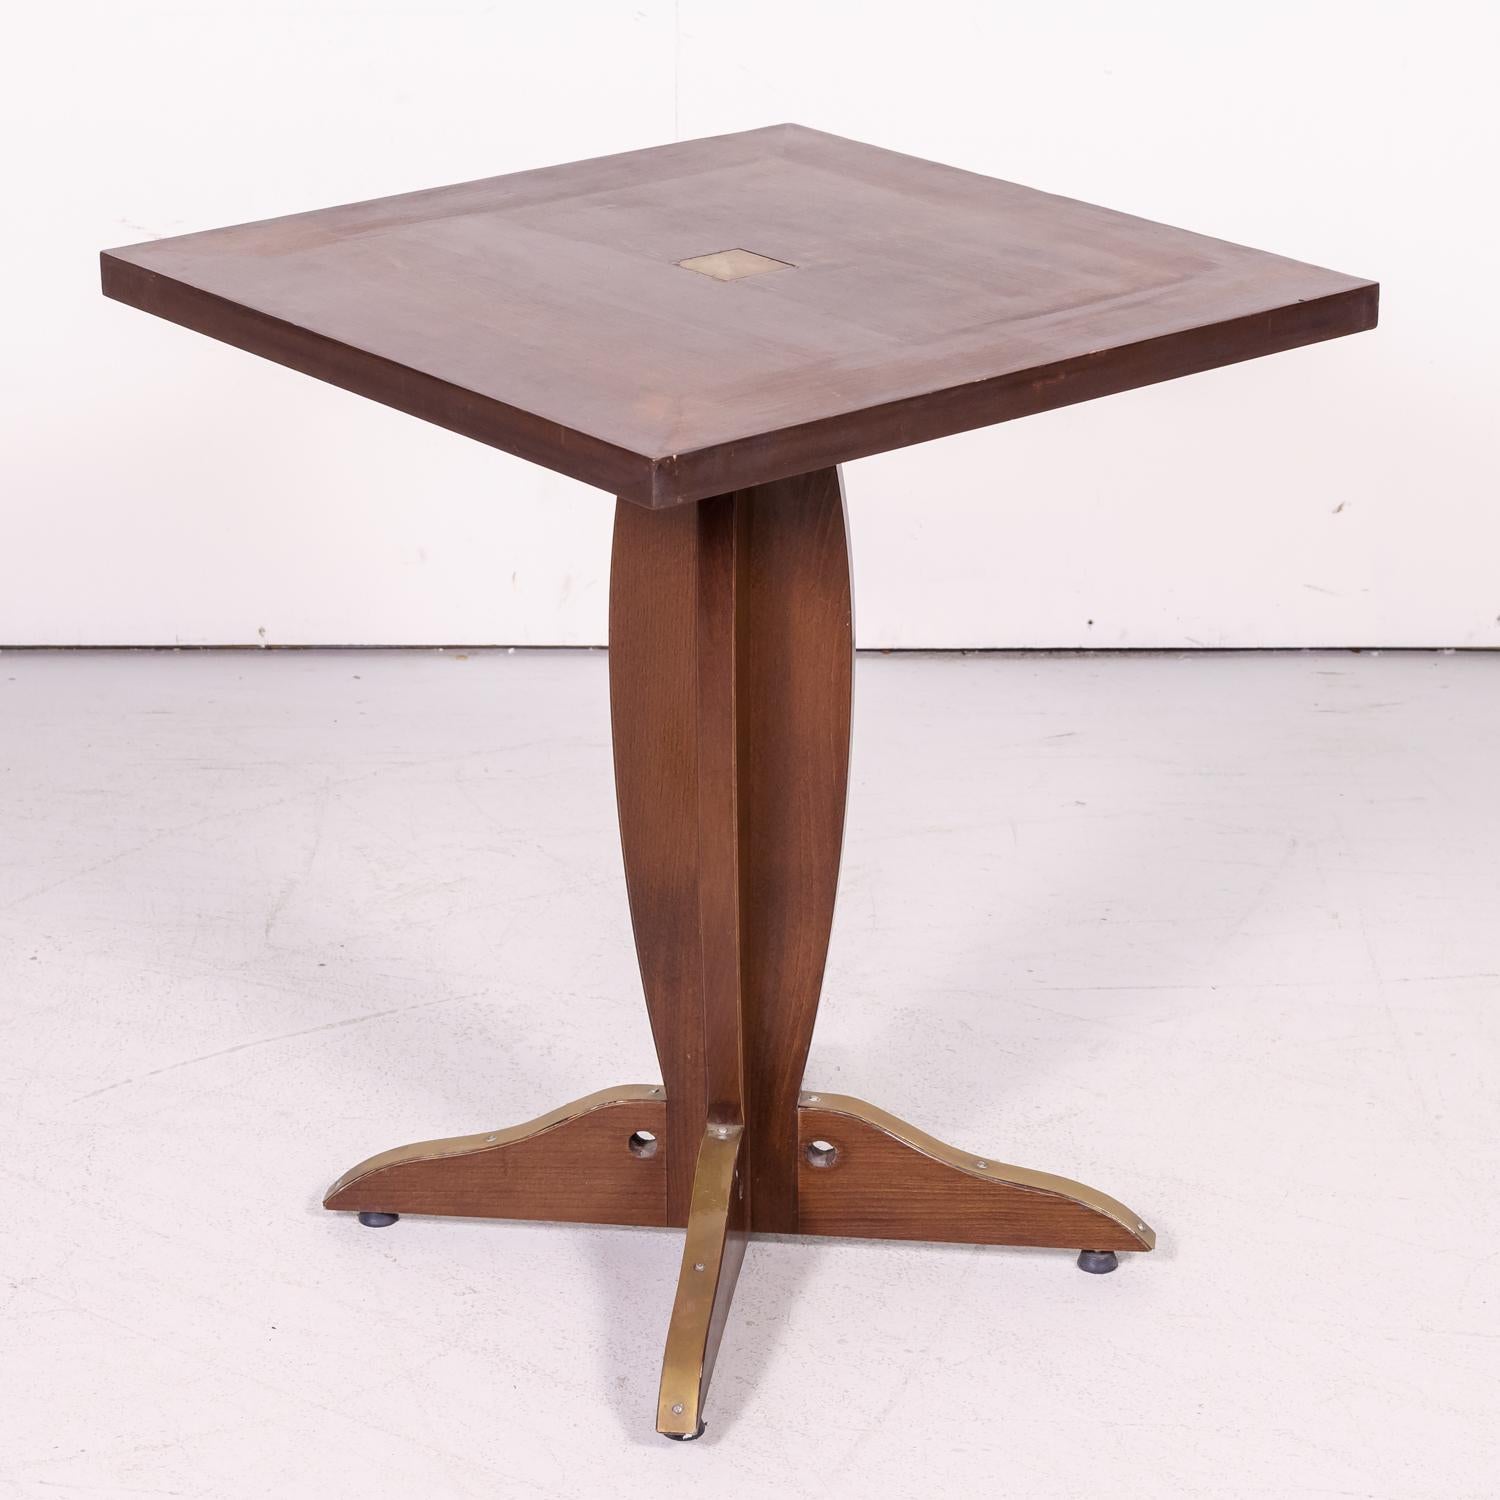 Pair of solid walnut French Art Deco period bistro tables having square walnut tops with center brass squares, circa 1920s. Raised on a walnut pedestal base with four feet having brass accents on top. Perfect for indoors or a covered outdoor area.